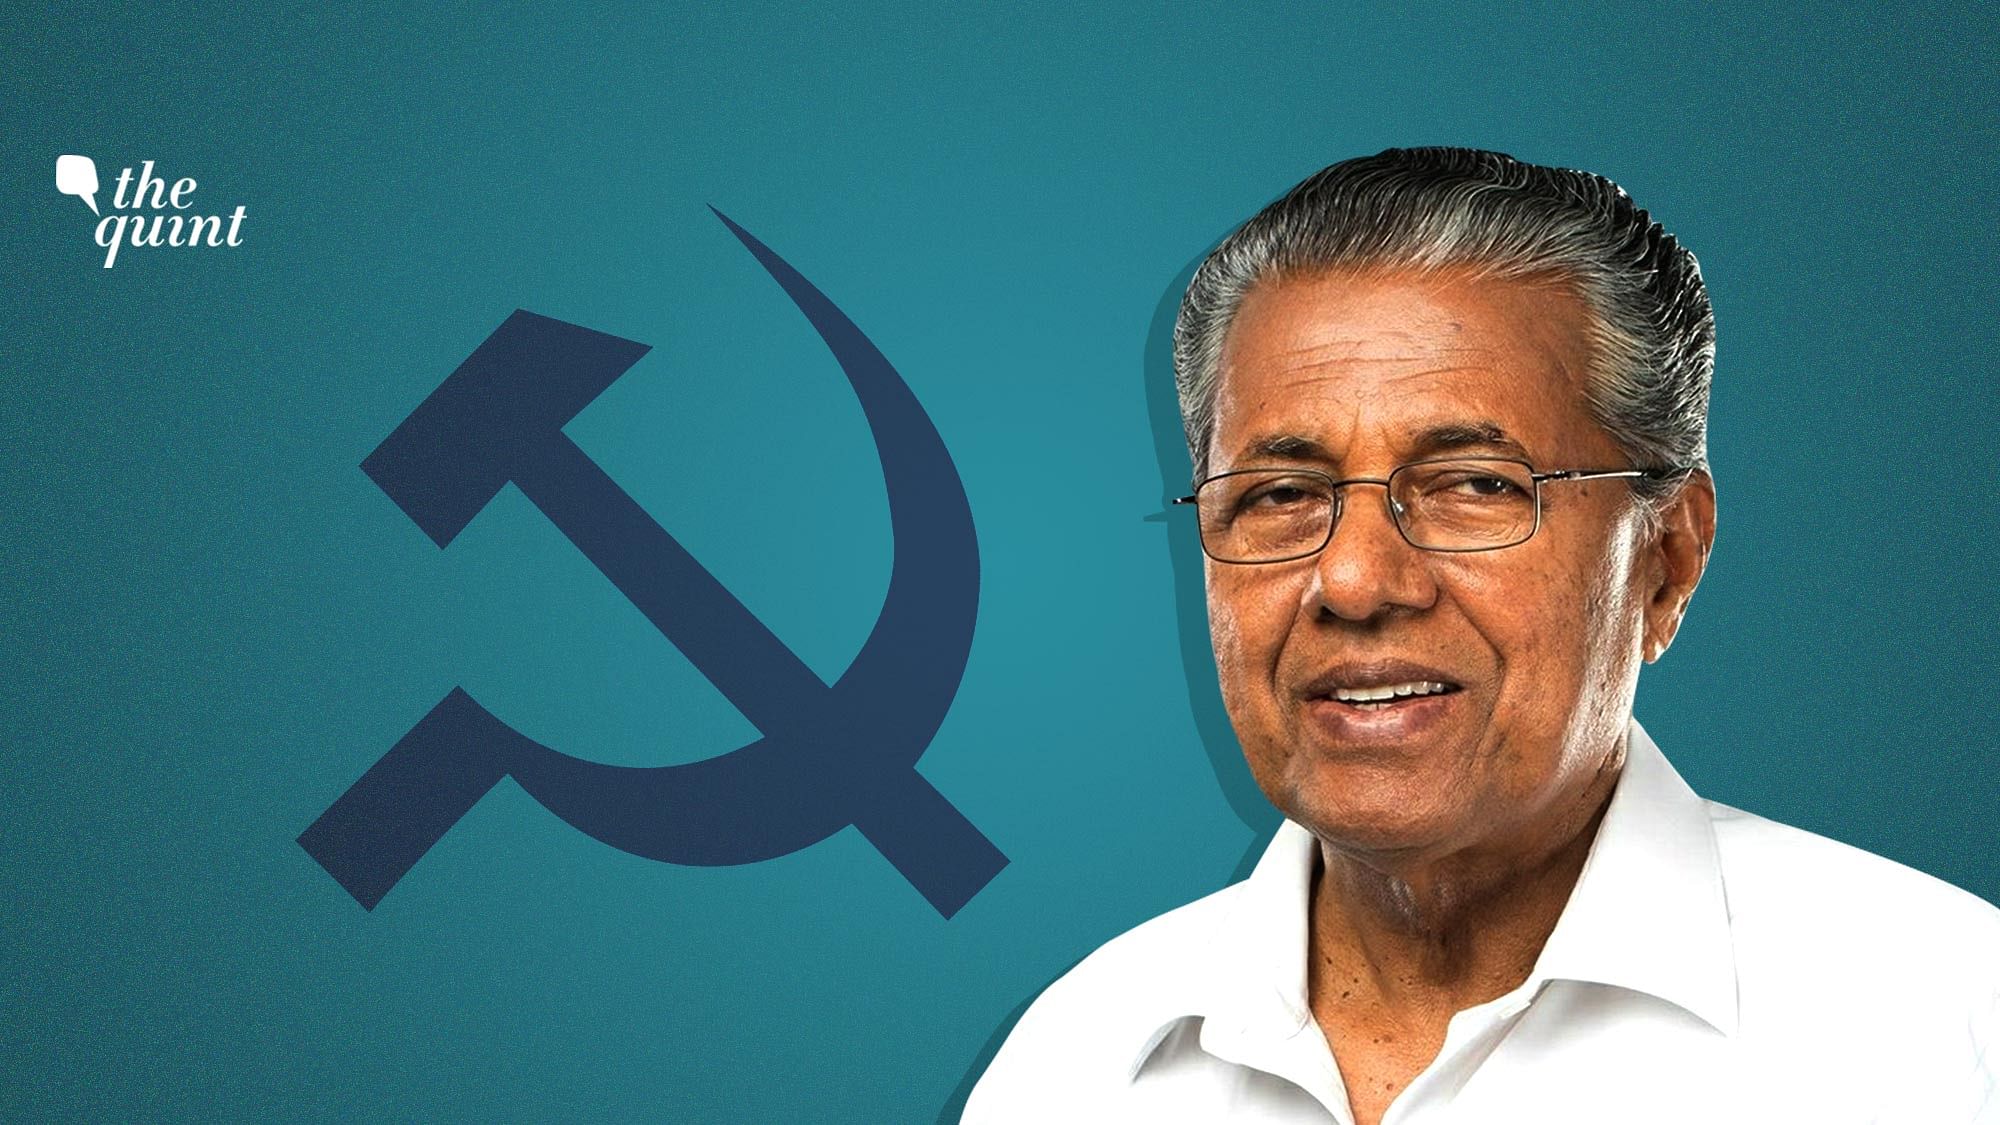 Pinarayi Vijayan of LDF has been re-elected to power, squashing UDF hopes of returning to power.